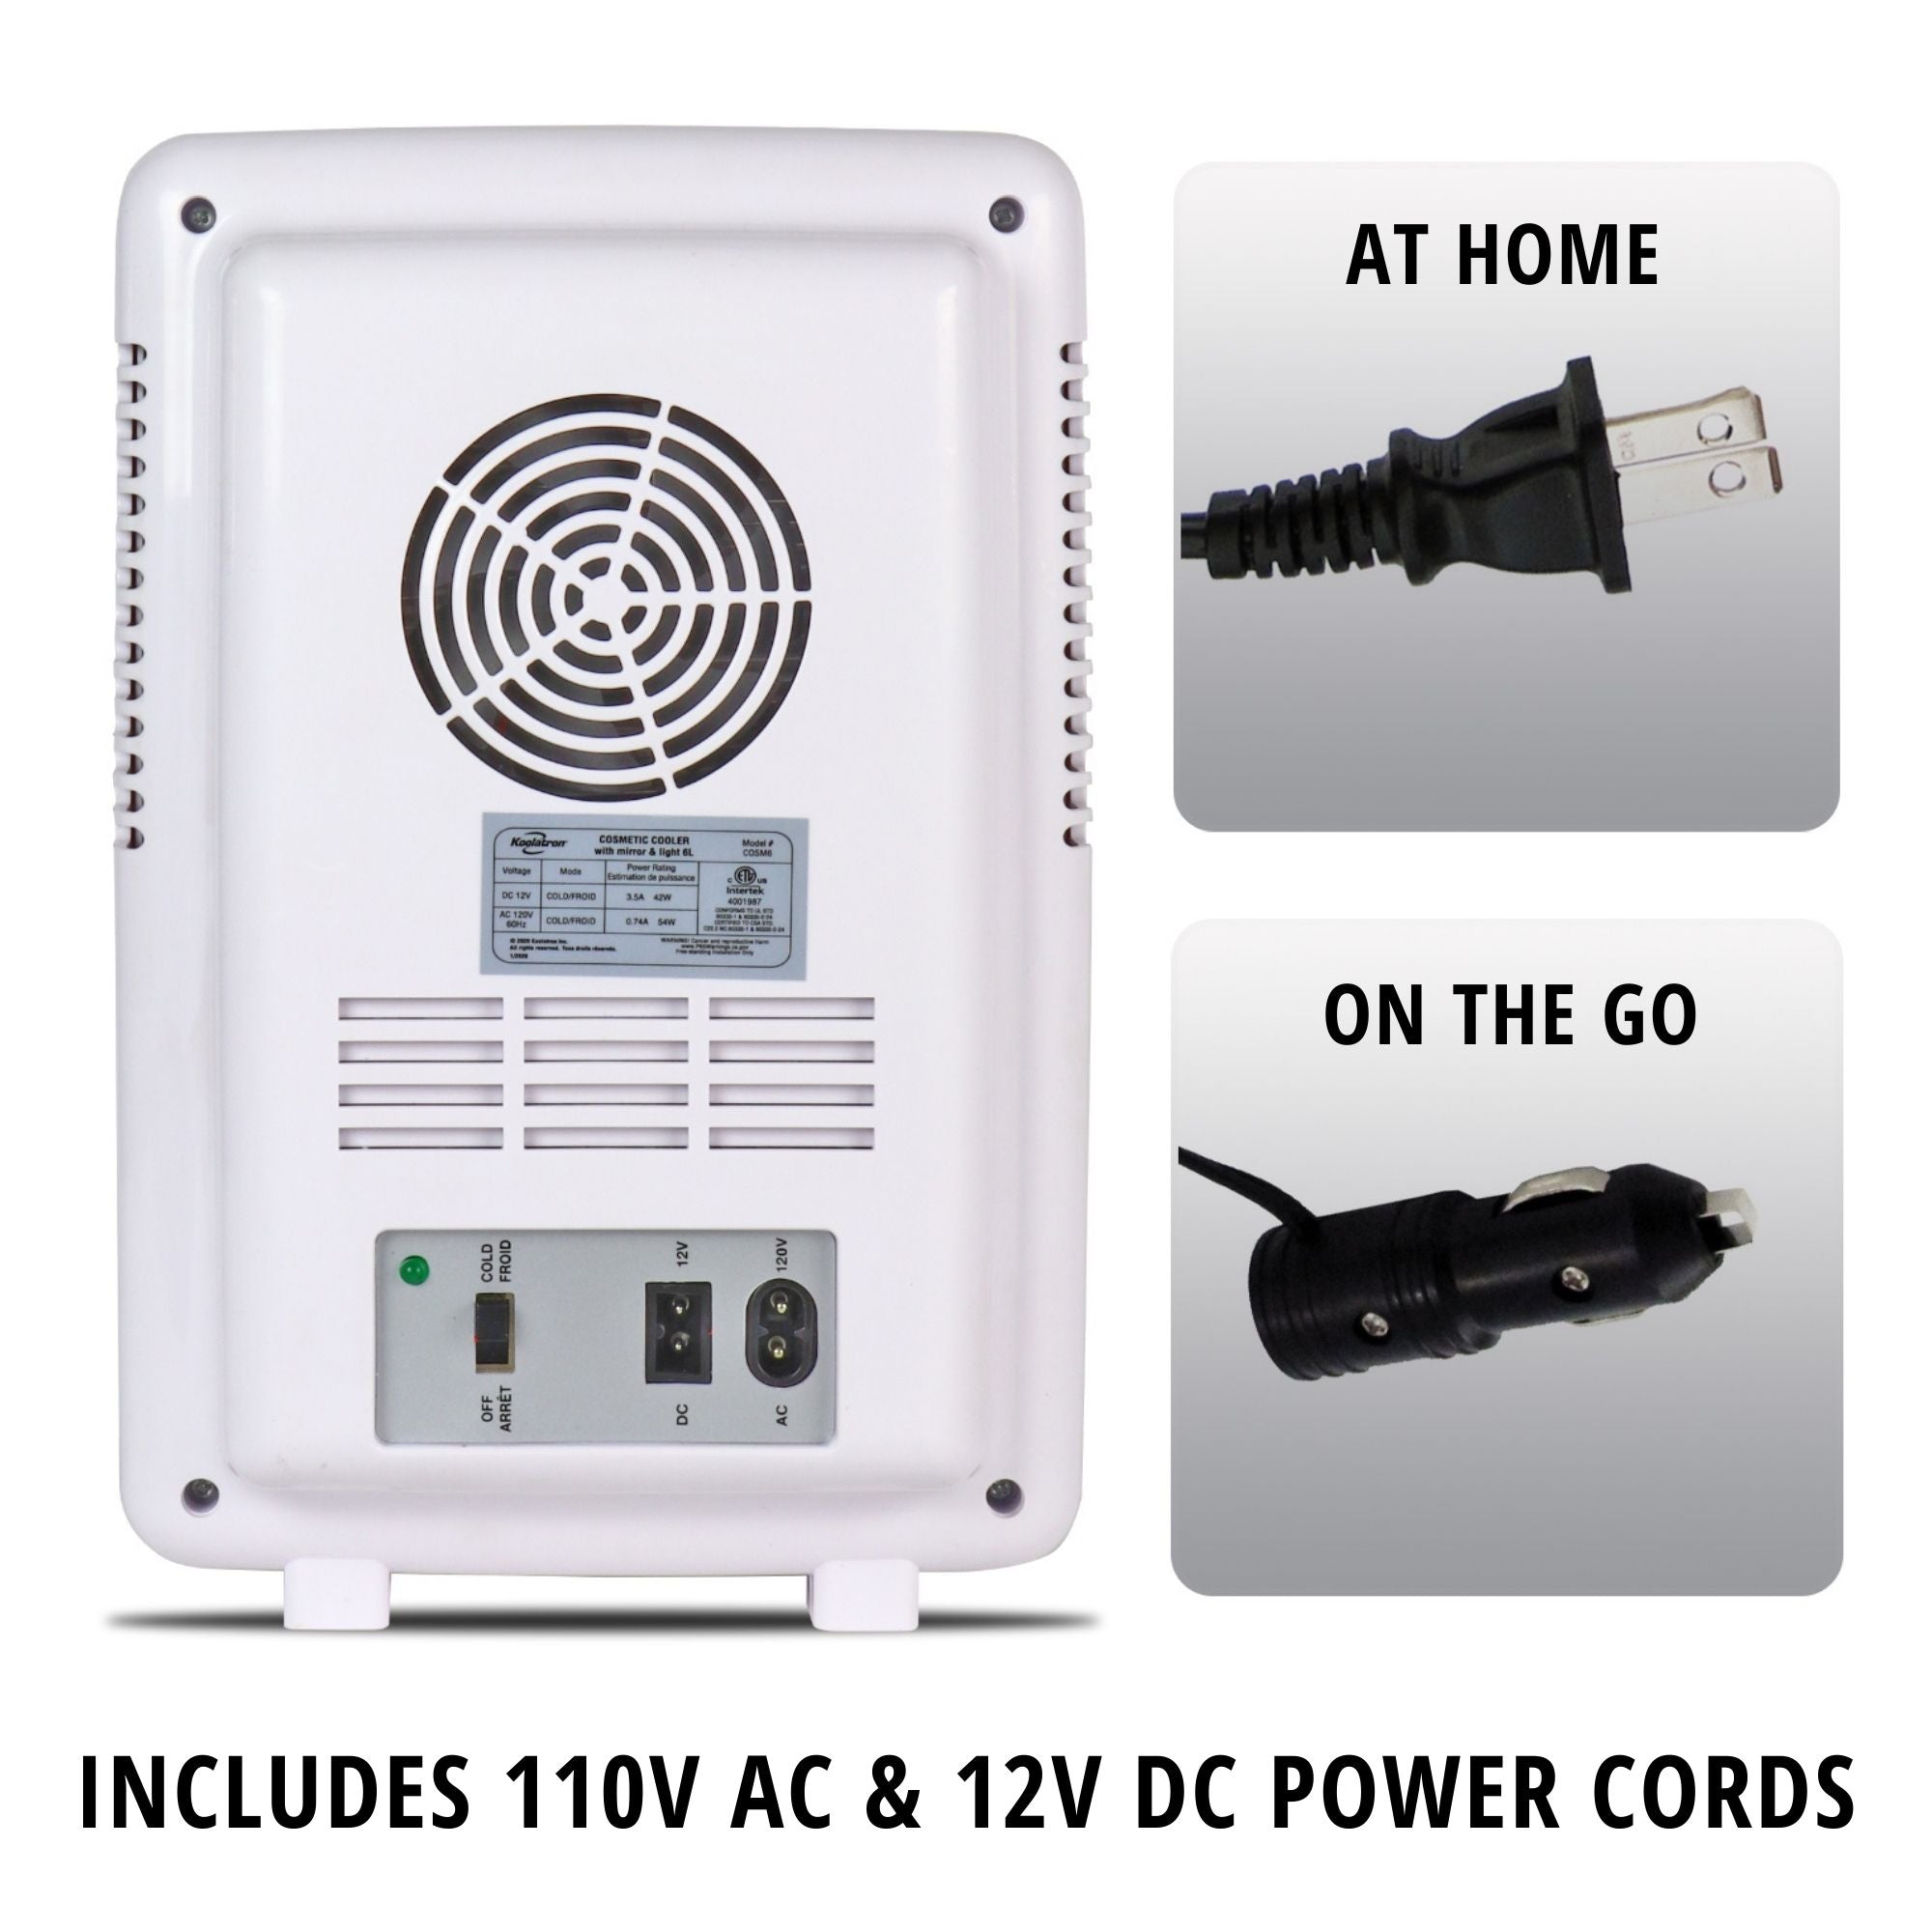 Product shot on a white background of the back of the cosmetics fridge with closeup images to the right of the AC and DC cords, labeled "at home" and "on the go" respectively. Text below reads, "Includes 110V AC and 12V DC power cords"